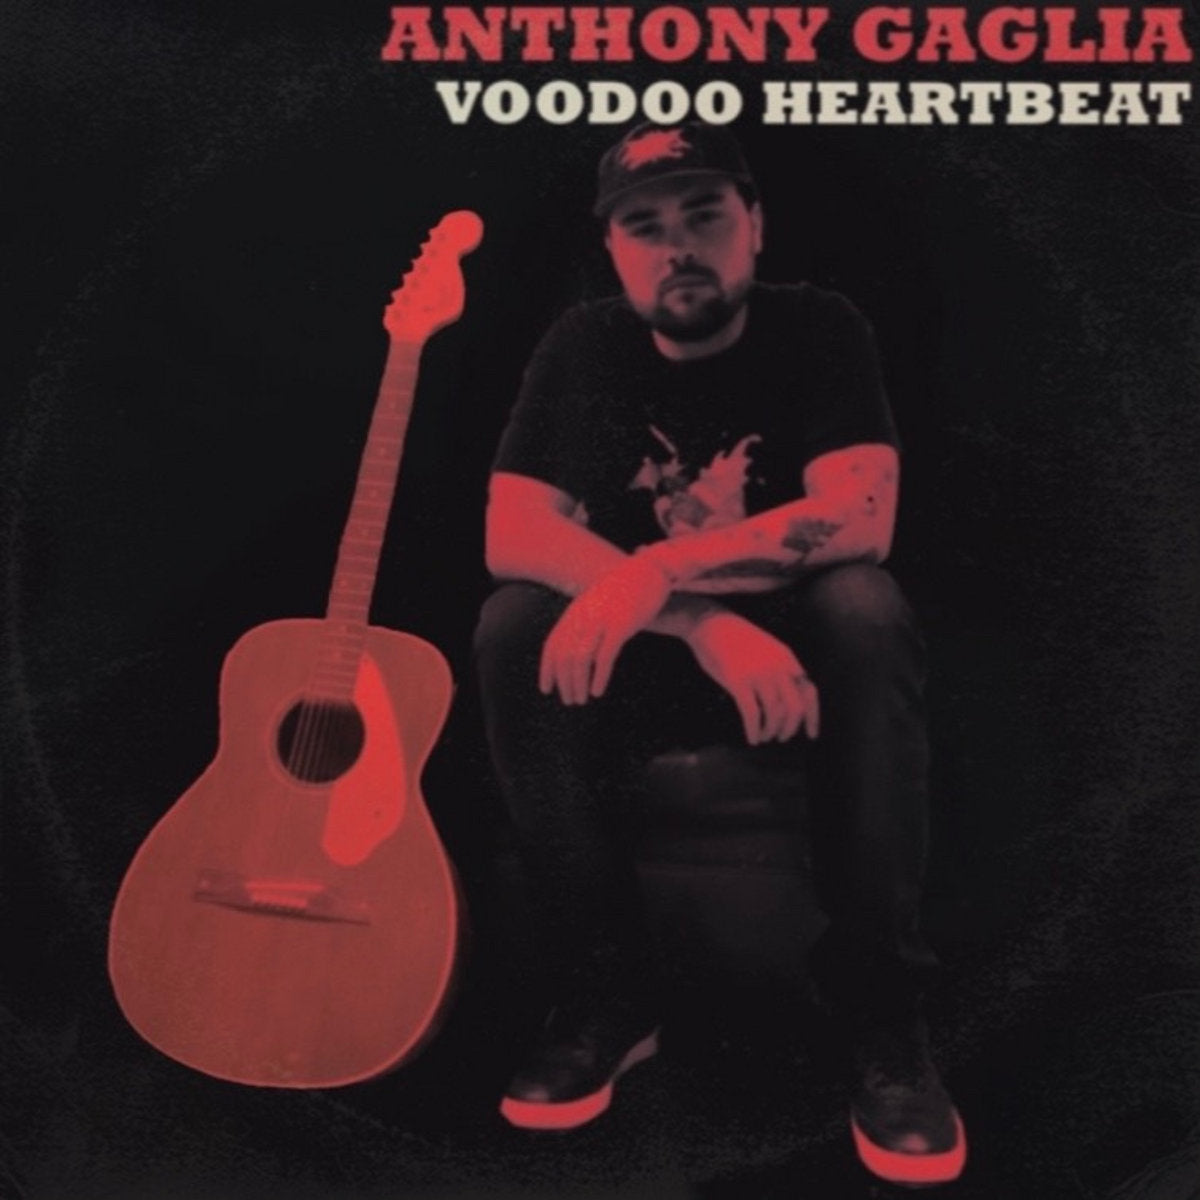 Anthony Gaglia - "Voodoo Heartbeat" Compact Disc